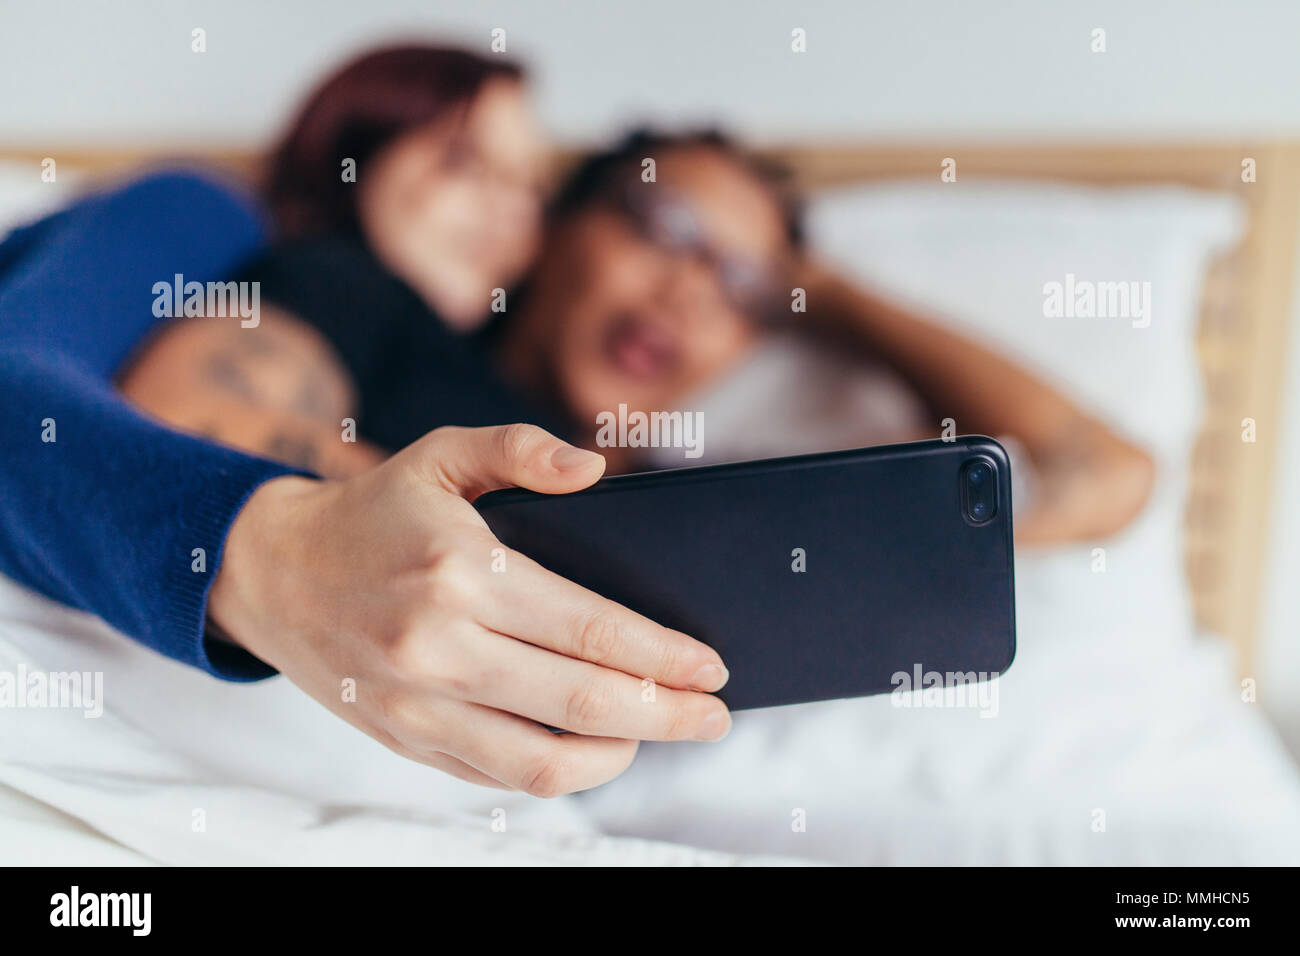 Couple lying together on bed and taking selfie with smart phone. Focus on mobile phone in hand of woman. Stock Photo